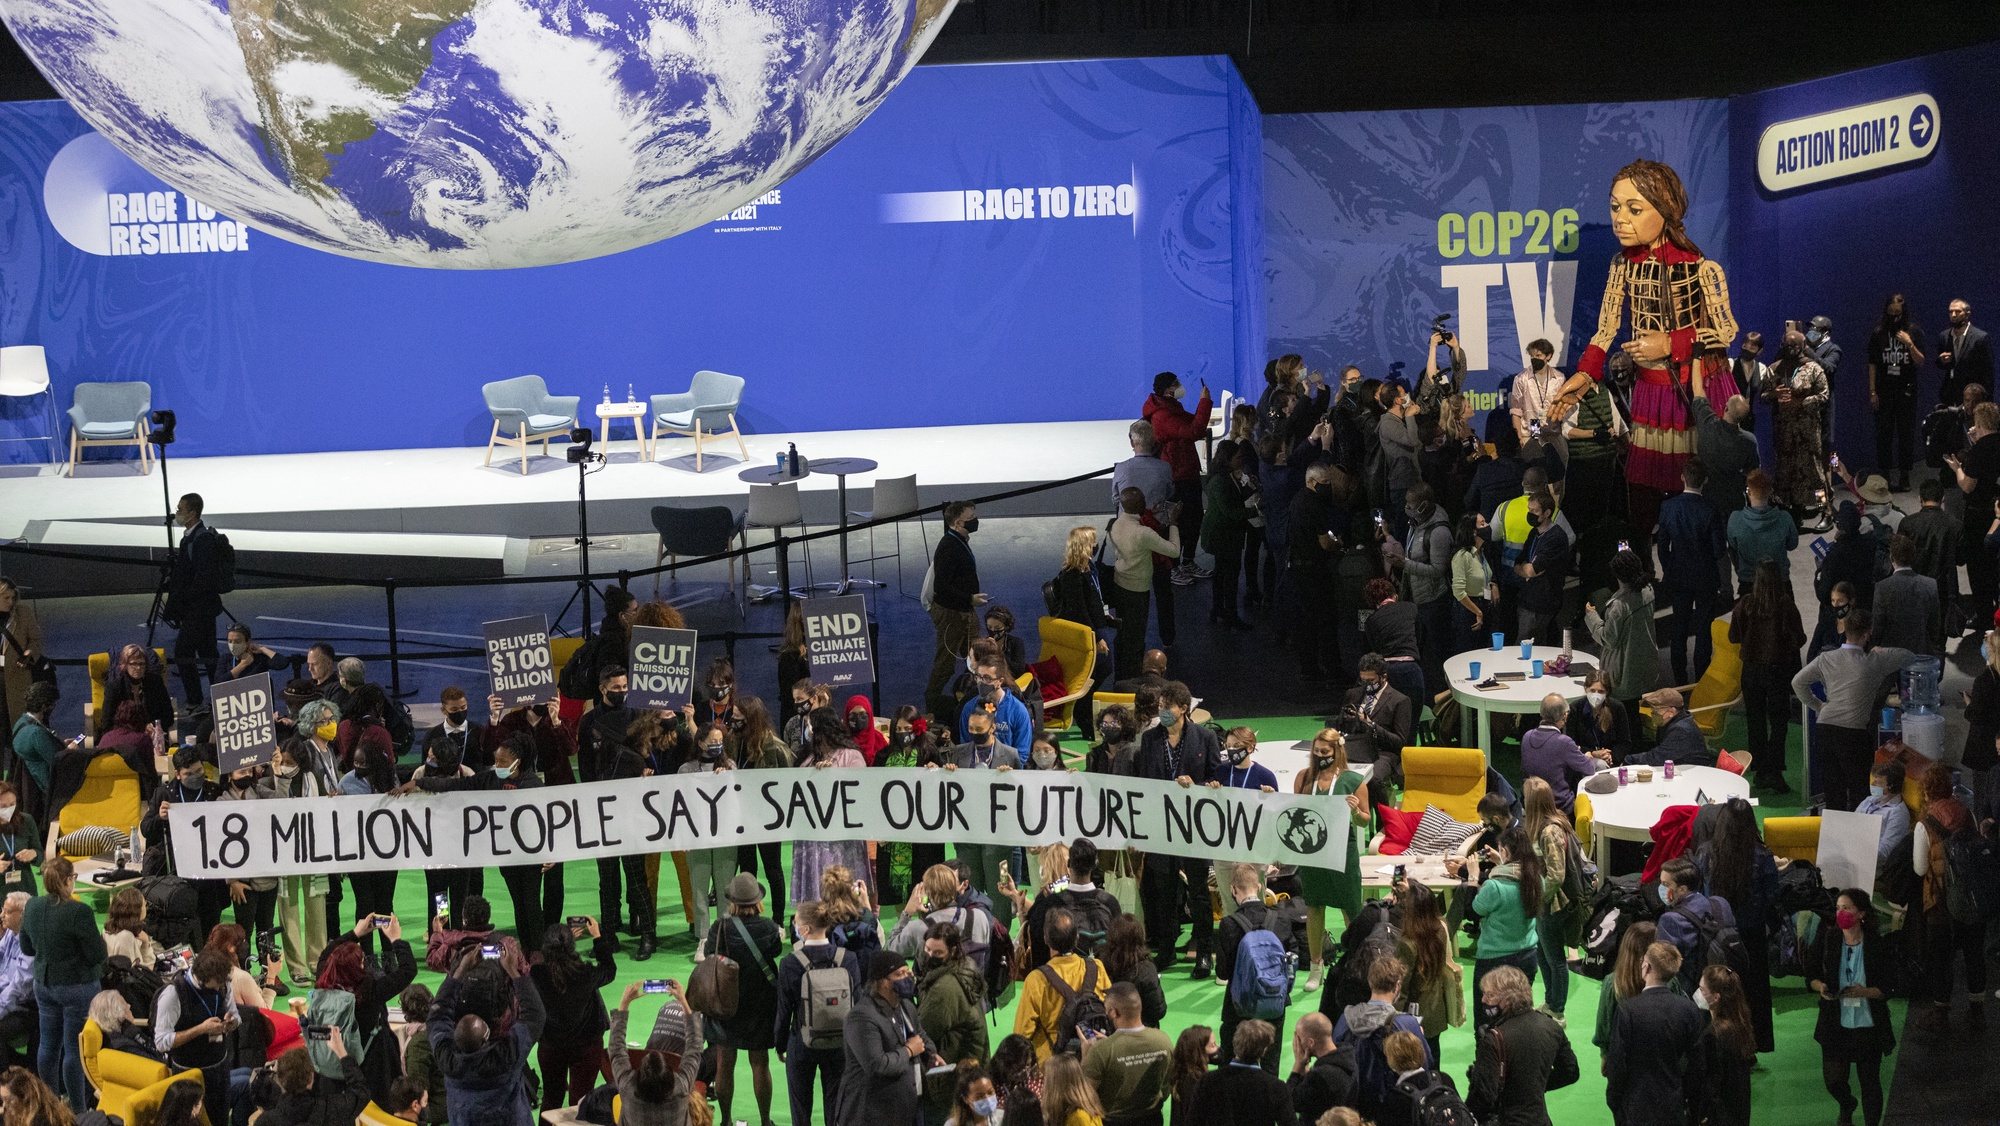 epa09572554 Delegates and participants gather around Little Amal (C), in the Hydro during the COP26 UN Climate Summit in Glasgow, Britain, 09 November 2021. Little Amal is the giant puppet of a 3.5 metre-tall living artwork of a young Syrian refugee child on &#039;The Walk&#039;, travelling 8,000km in 2021 in support of refugees across Turkey, Greece, Italy, France, Switzerland, Germany, Belgium and the UK to focus attention on the urgent needs of young refugees. The 2021 United Nations Climate Change Conference (COP26) runs from 31 October to 12 November 2021 in Glasgow.  EPA/ROBERT PERRY